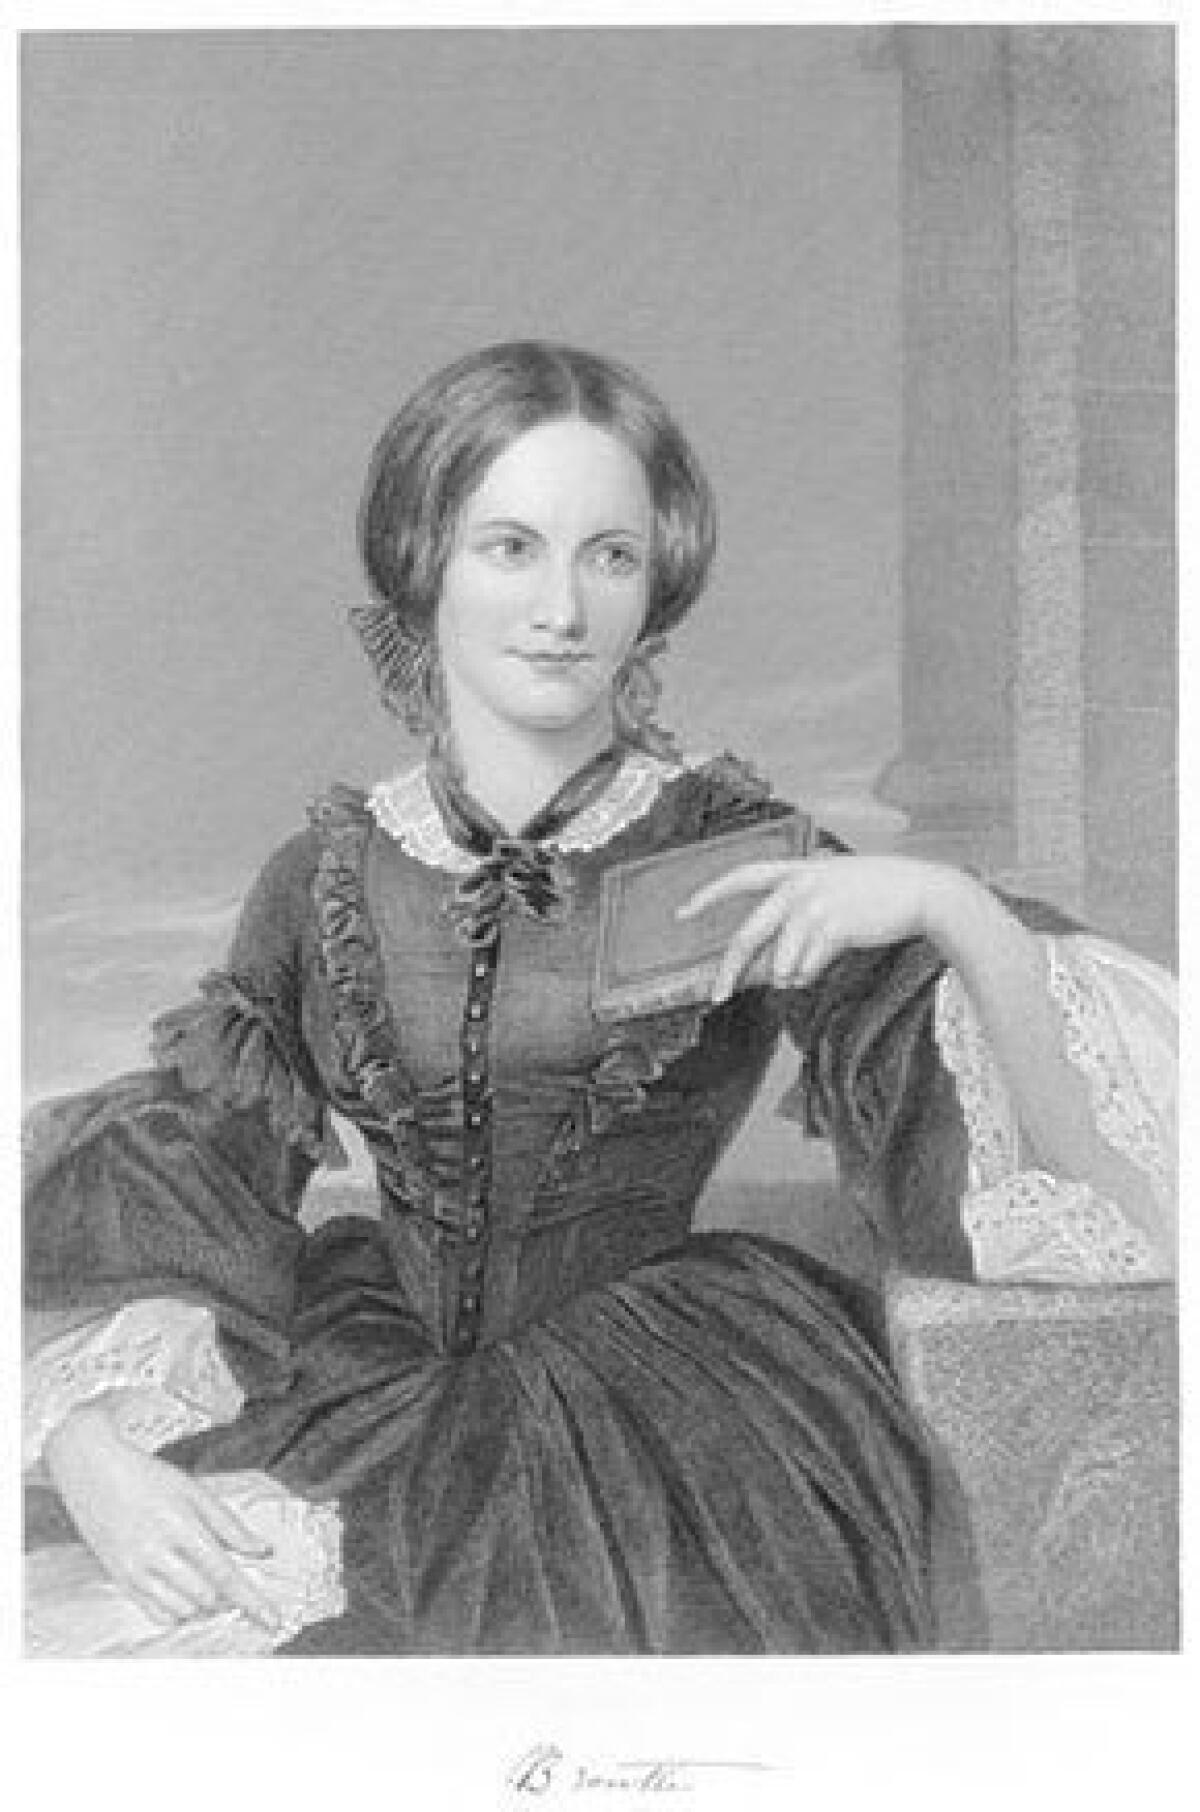 Charlotte Bronte, who wrote more than 200 poems, penned "I've Been Wandering in the Greenwoods" when she was just 13 years old.